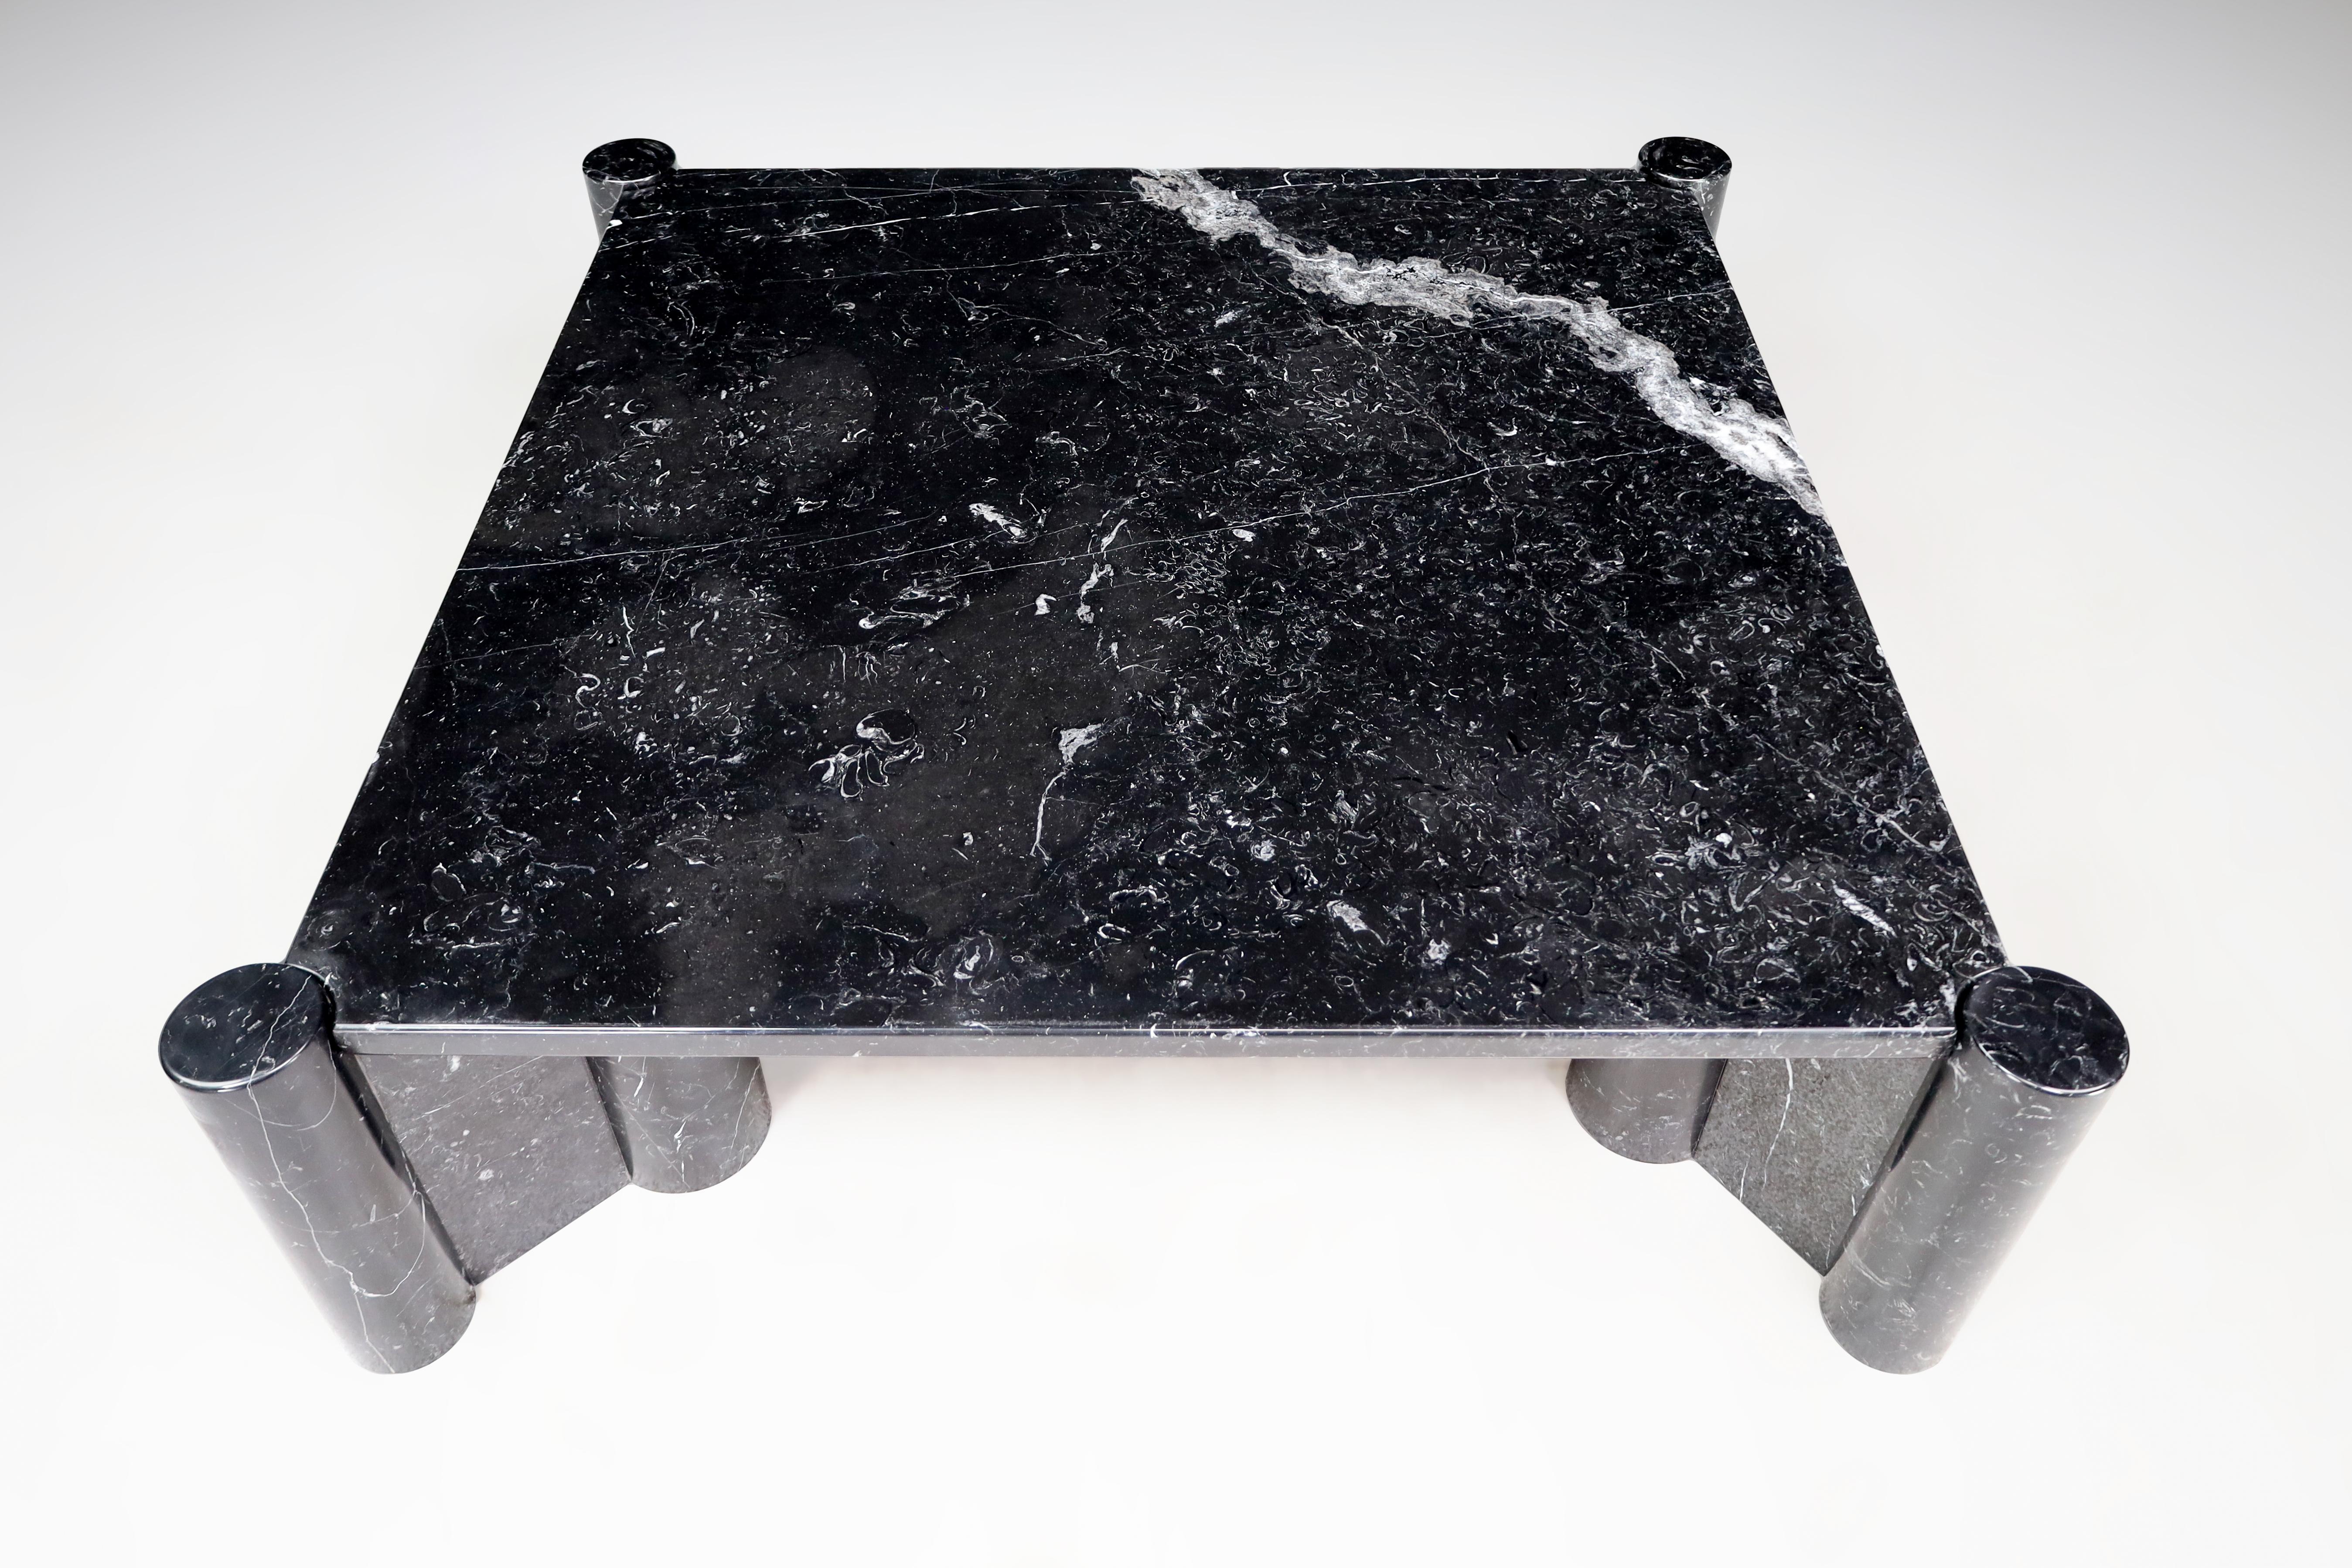 Gae Aulenti Jumbo Coffee Table for Knoll in Black Marquina Marble, Italy 1970s   2